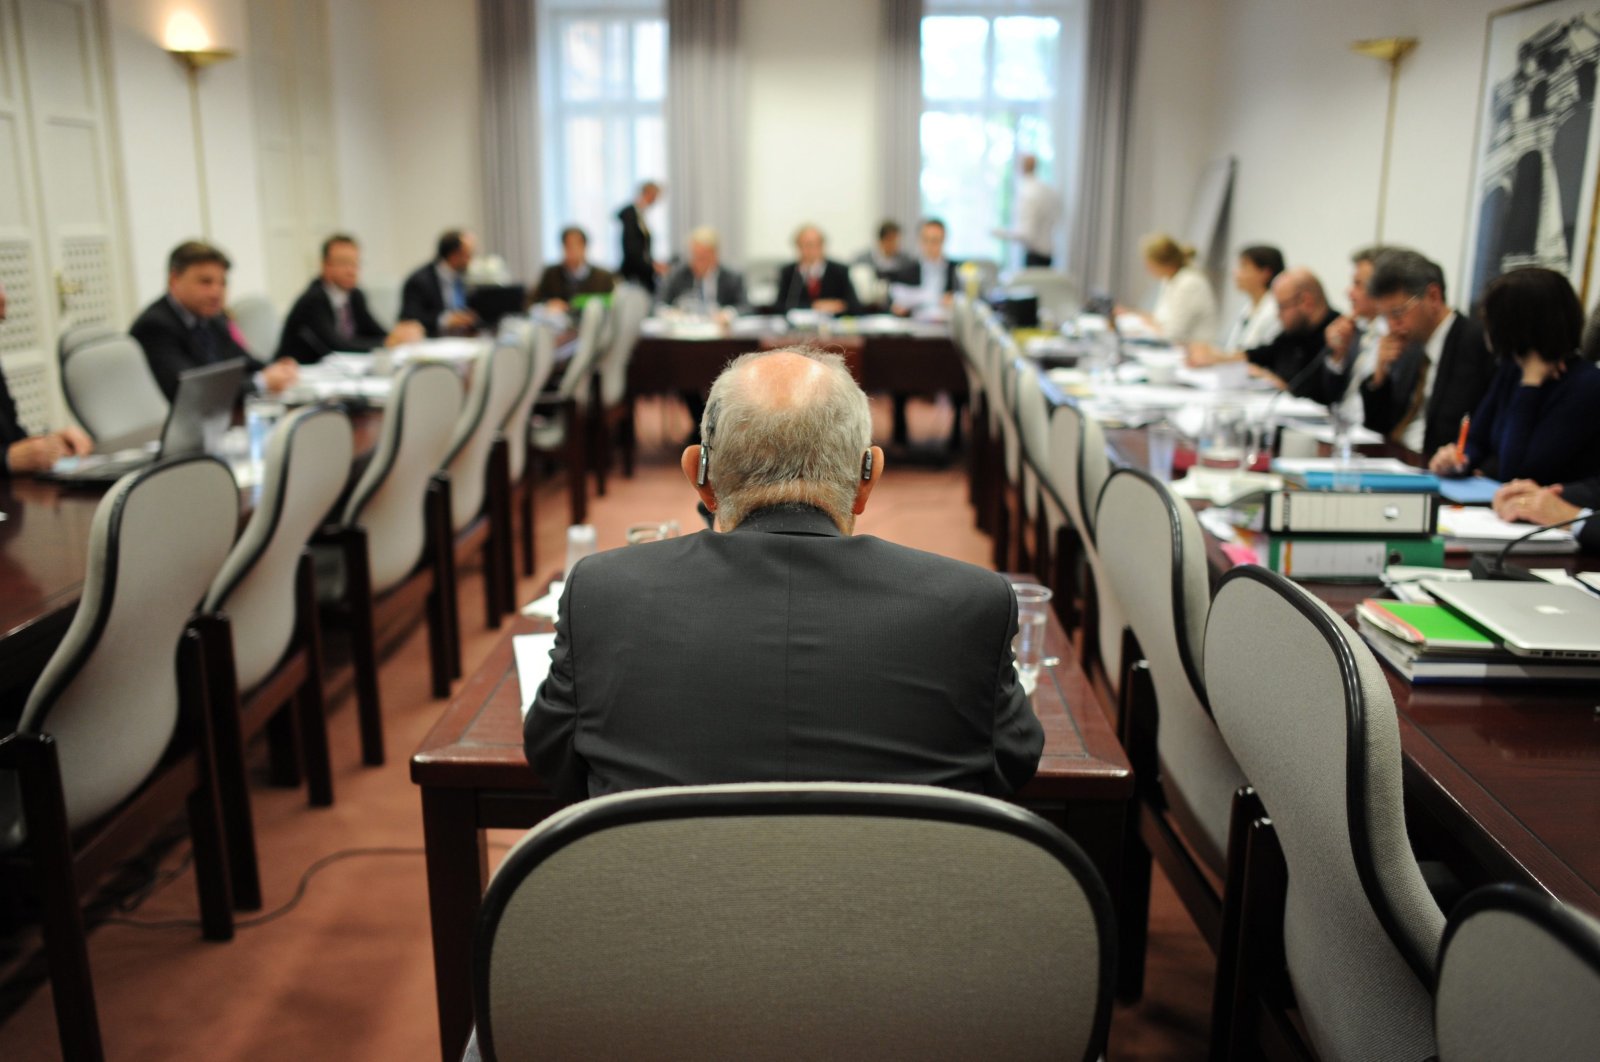 Former Premier of Bavaria Gunther Beckstein (back to camera) sits at a table to testify as a witness in the hearing of the NSU inquiry commission at the Bavarian state parliament in Munich, Germany, June 11, 2013. (EPA Photo)